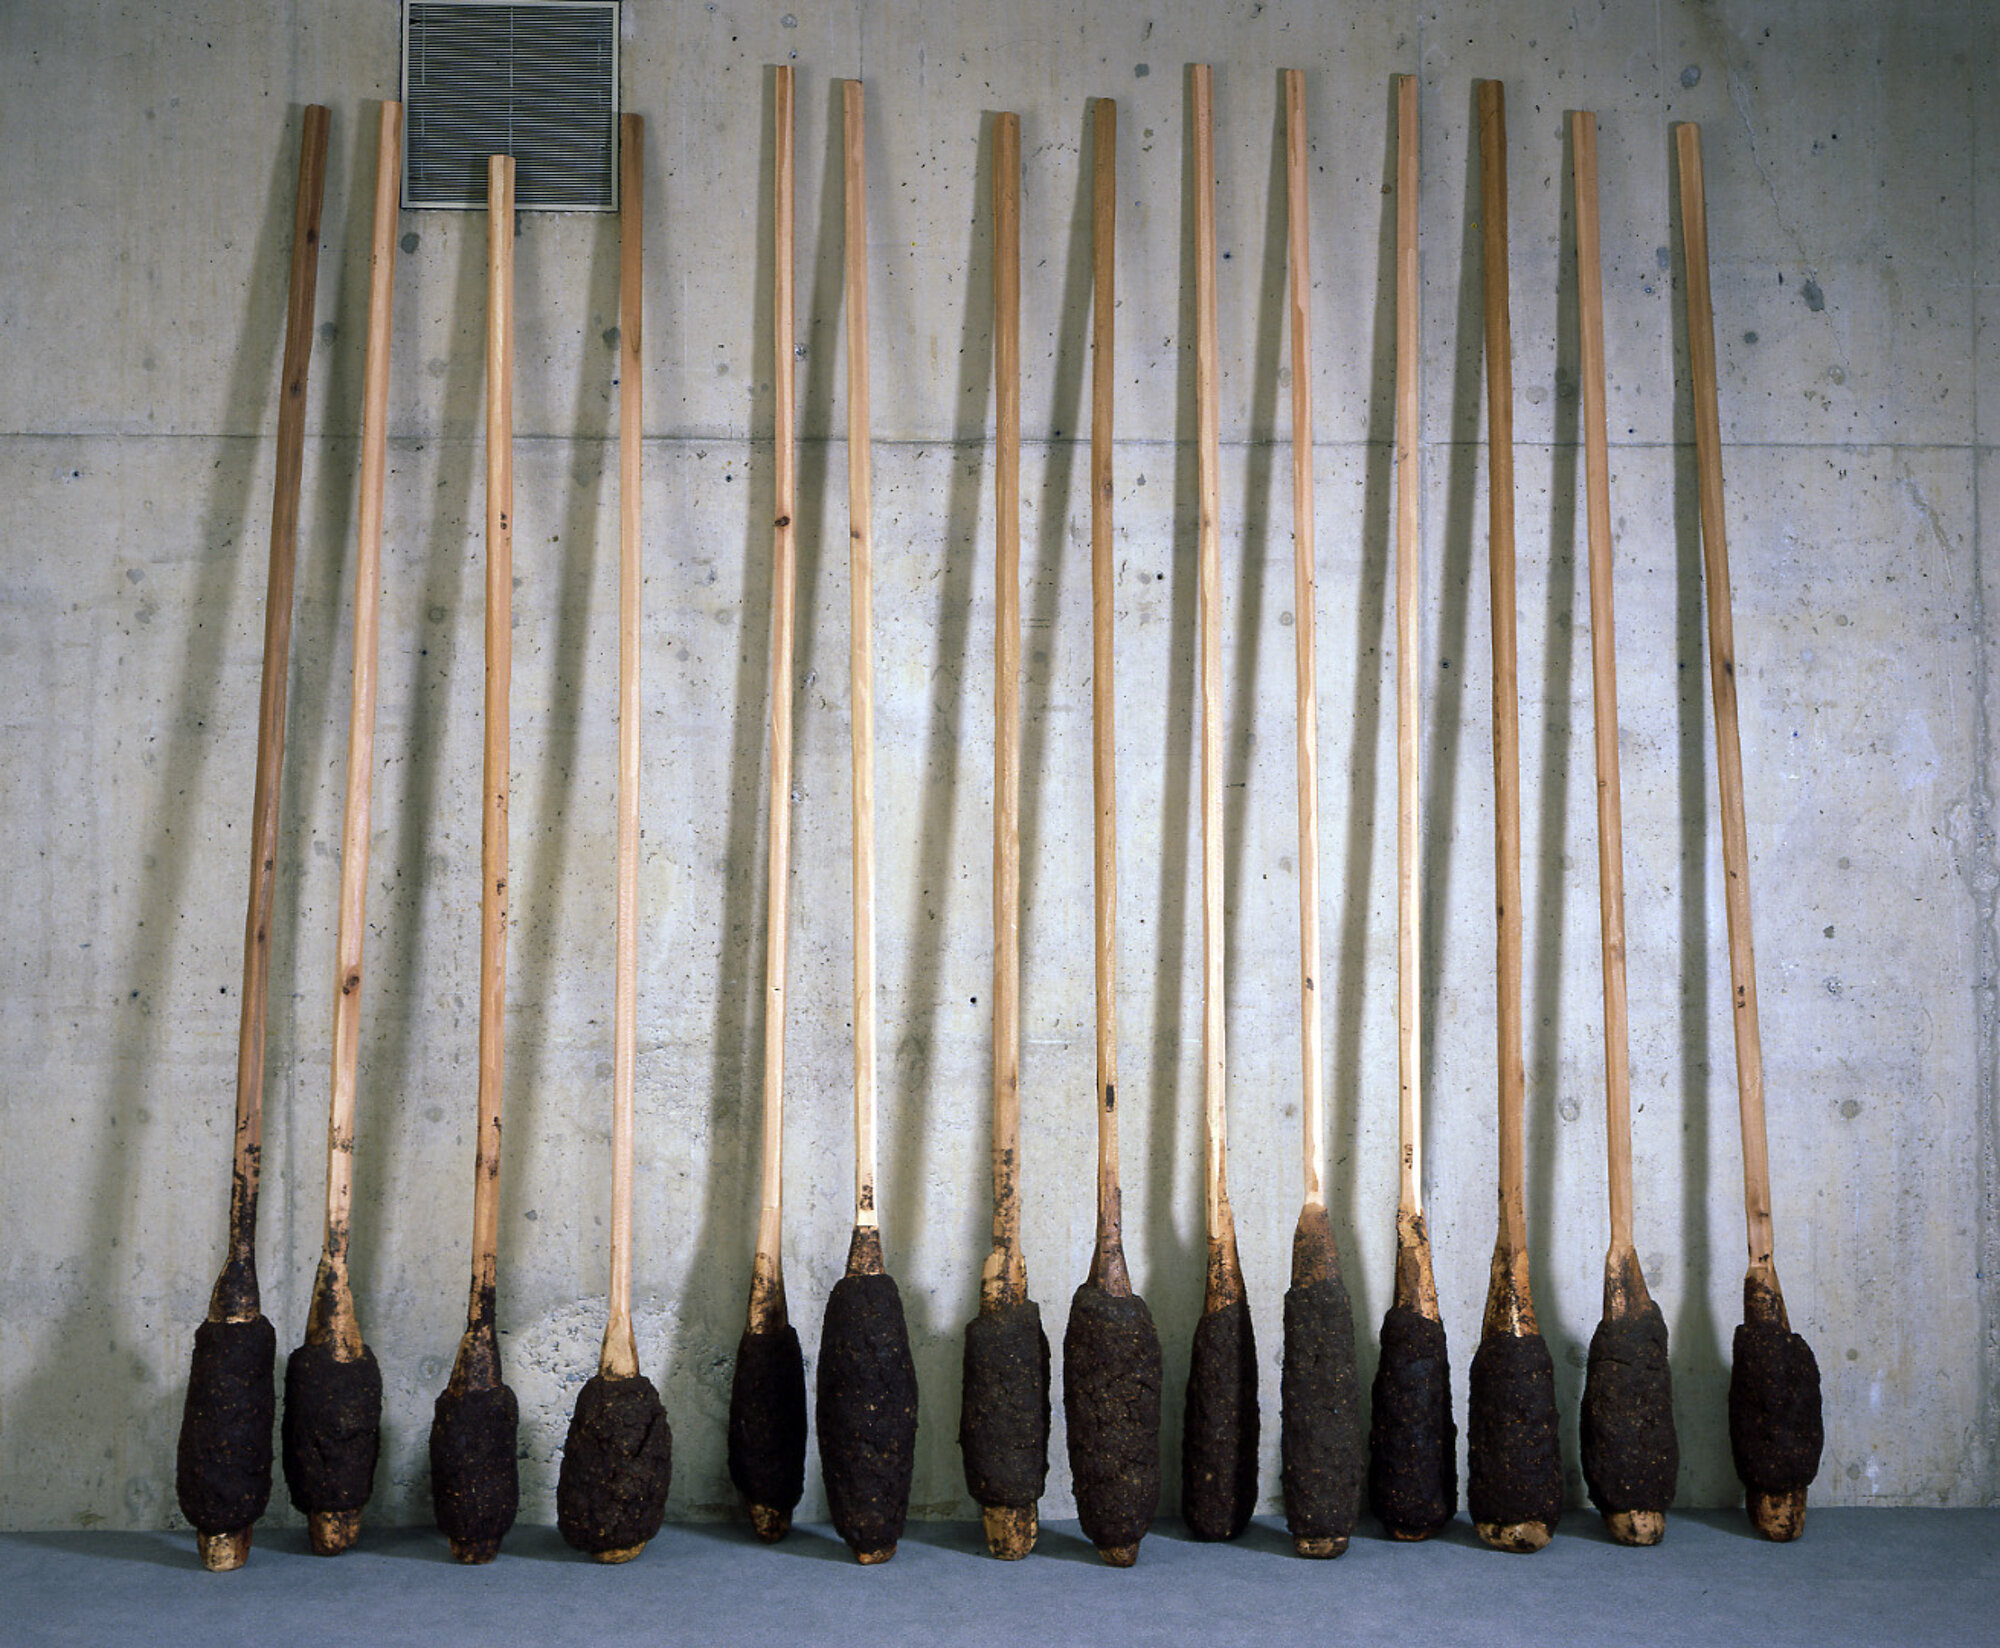       Untitled (earth spoons) , 1995 Cedar, peat moss, and glue 122 x 140 x 20 in.    University of Massachusetts at Amherst  